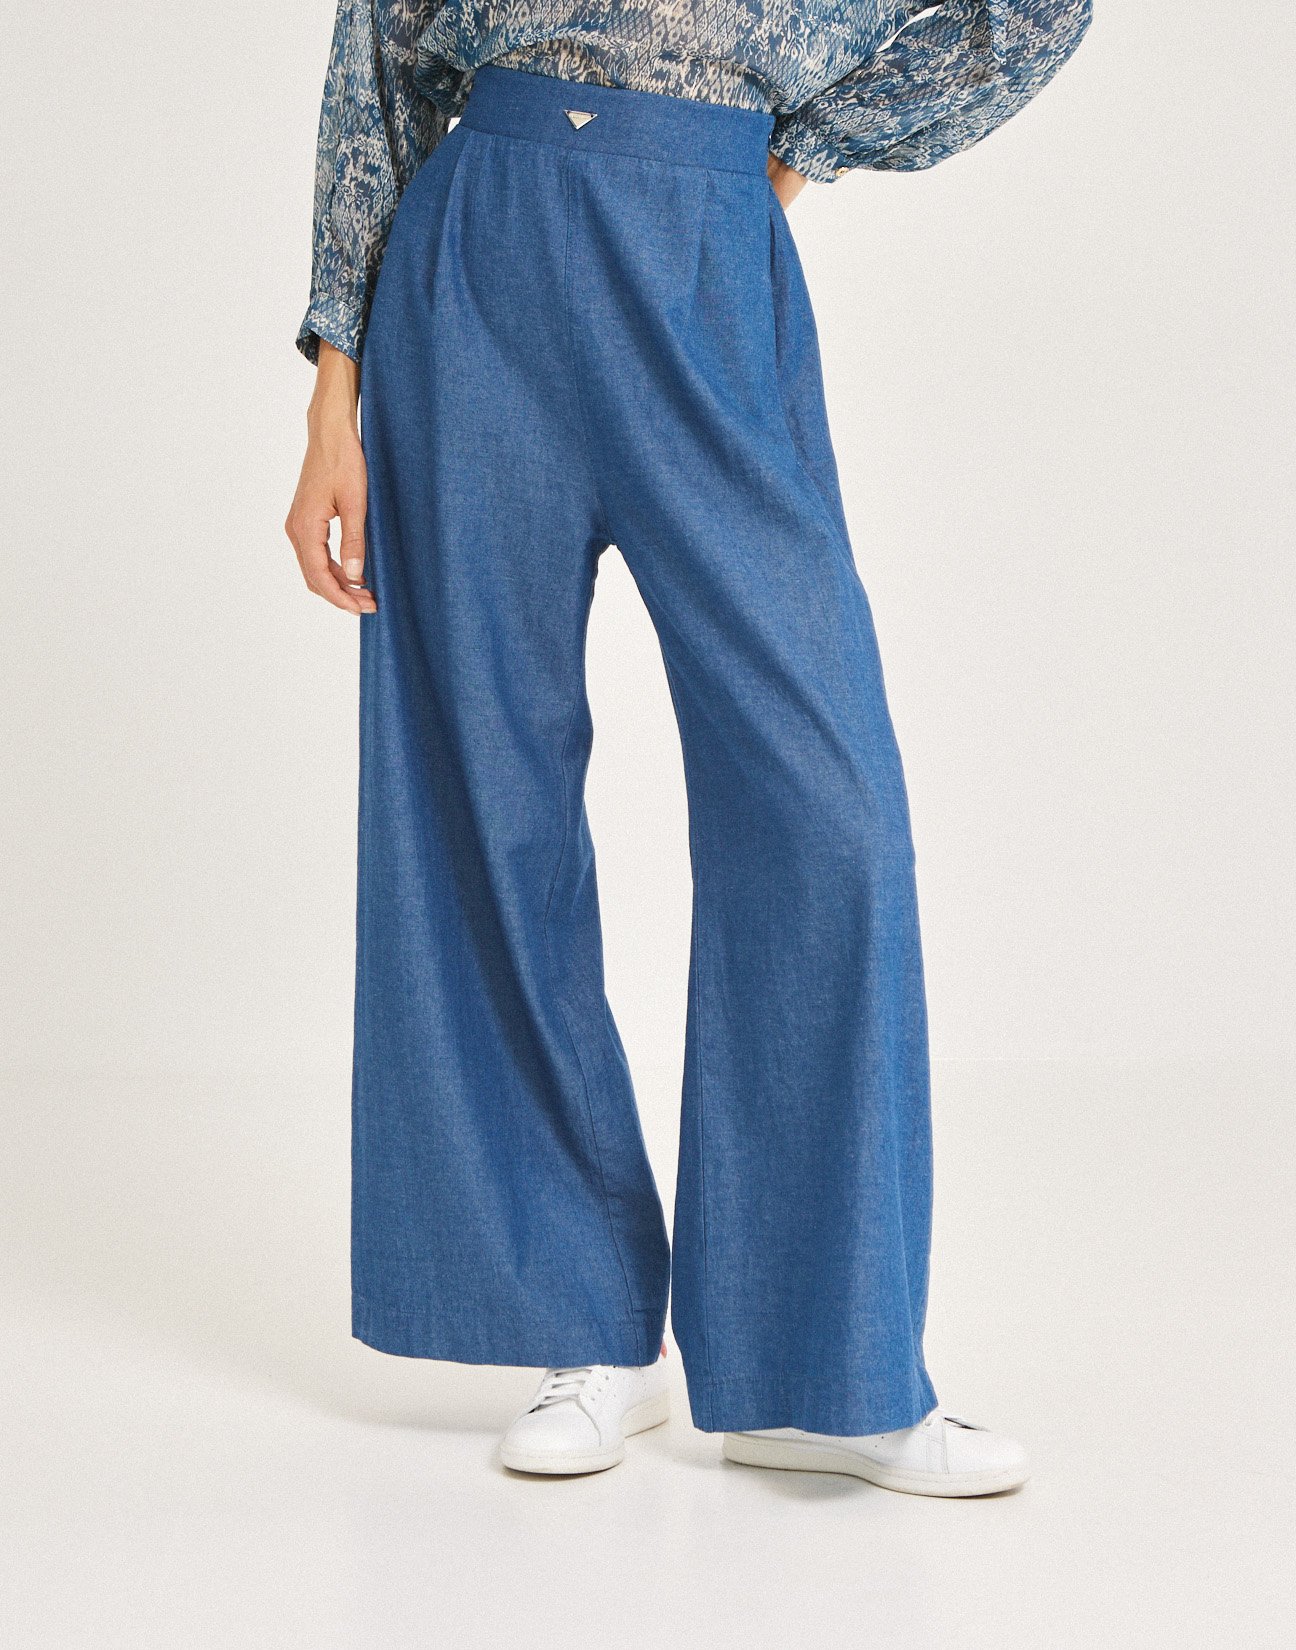 Pleated jeans trousers